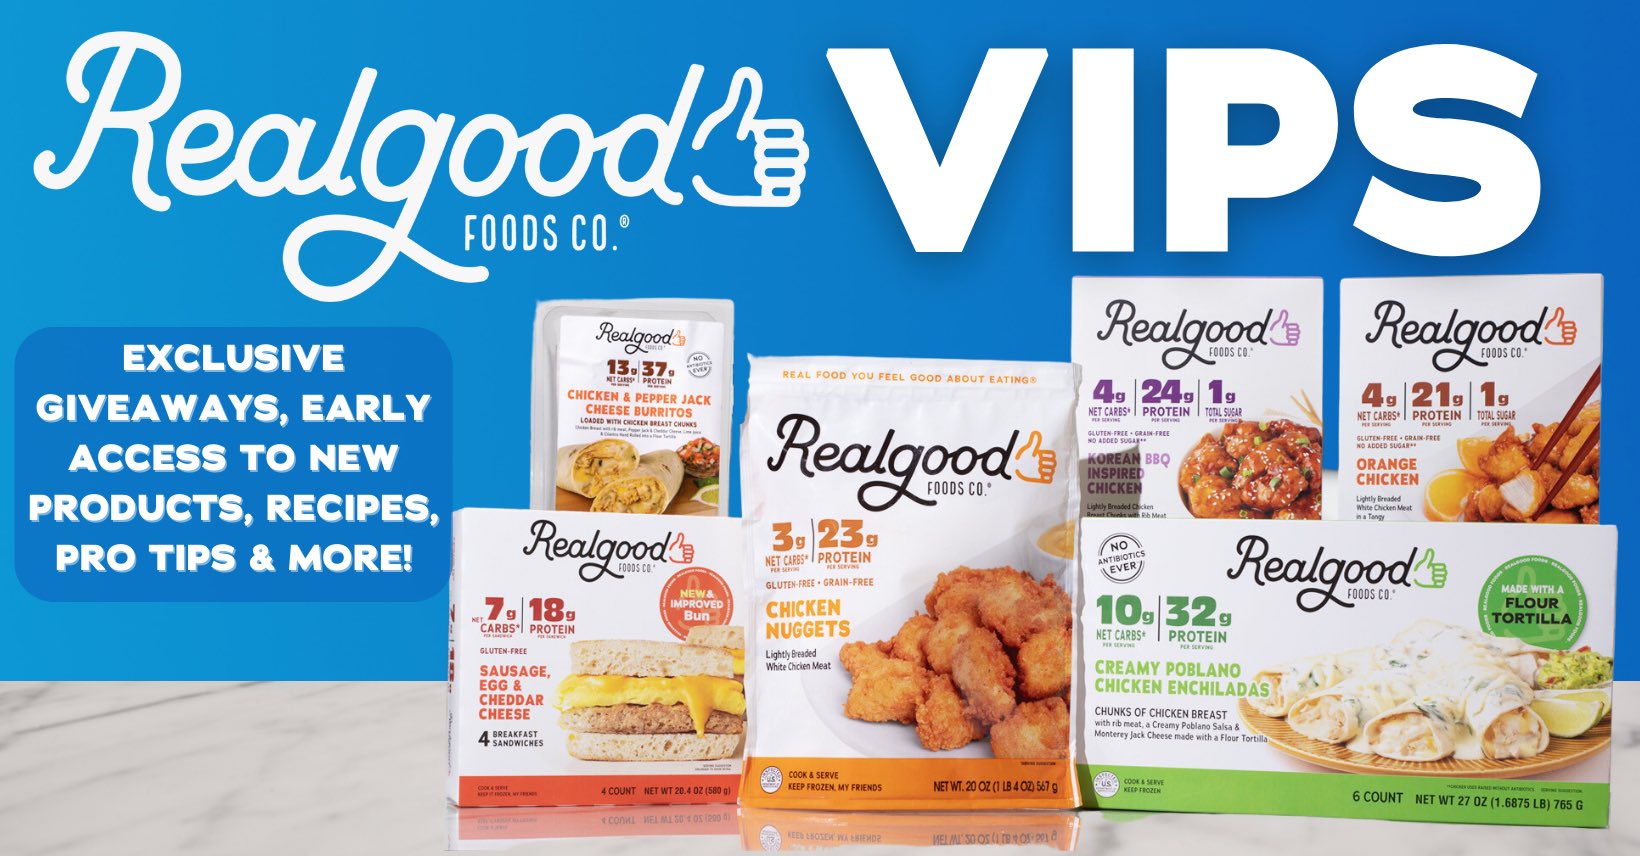 Real Good Foods launches high-protein, low-carb chicken nuggets